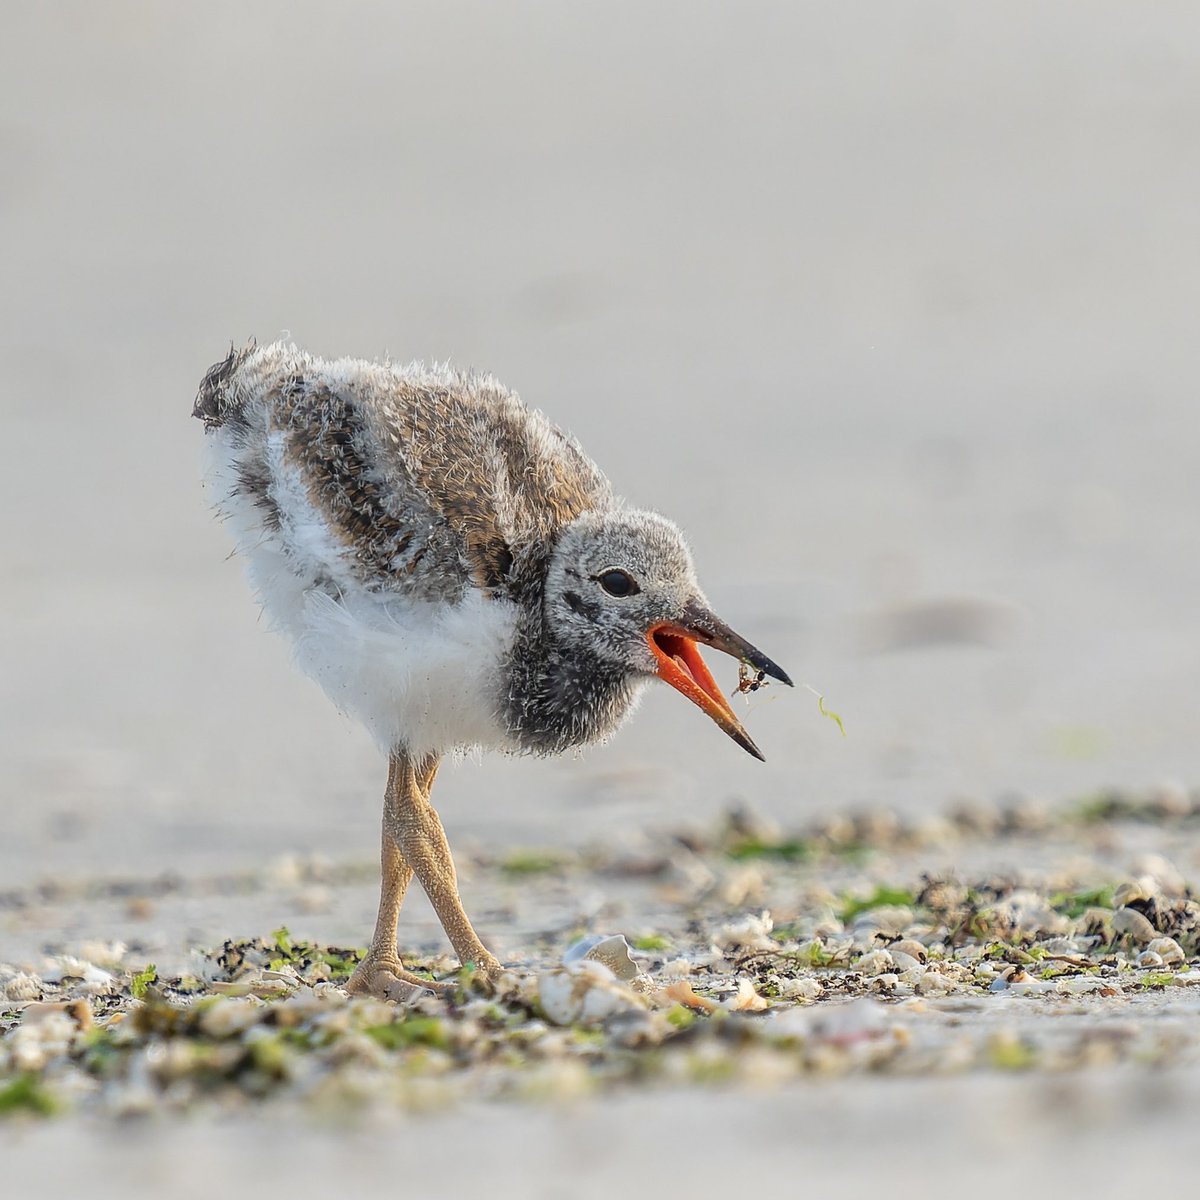 American Oystercatcher chick looks quite pleased with what it found for dinner on Fort Tilden beach.

#birds #birdwatching #nature #sharetheshore #wildlife